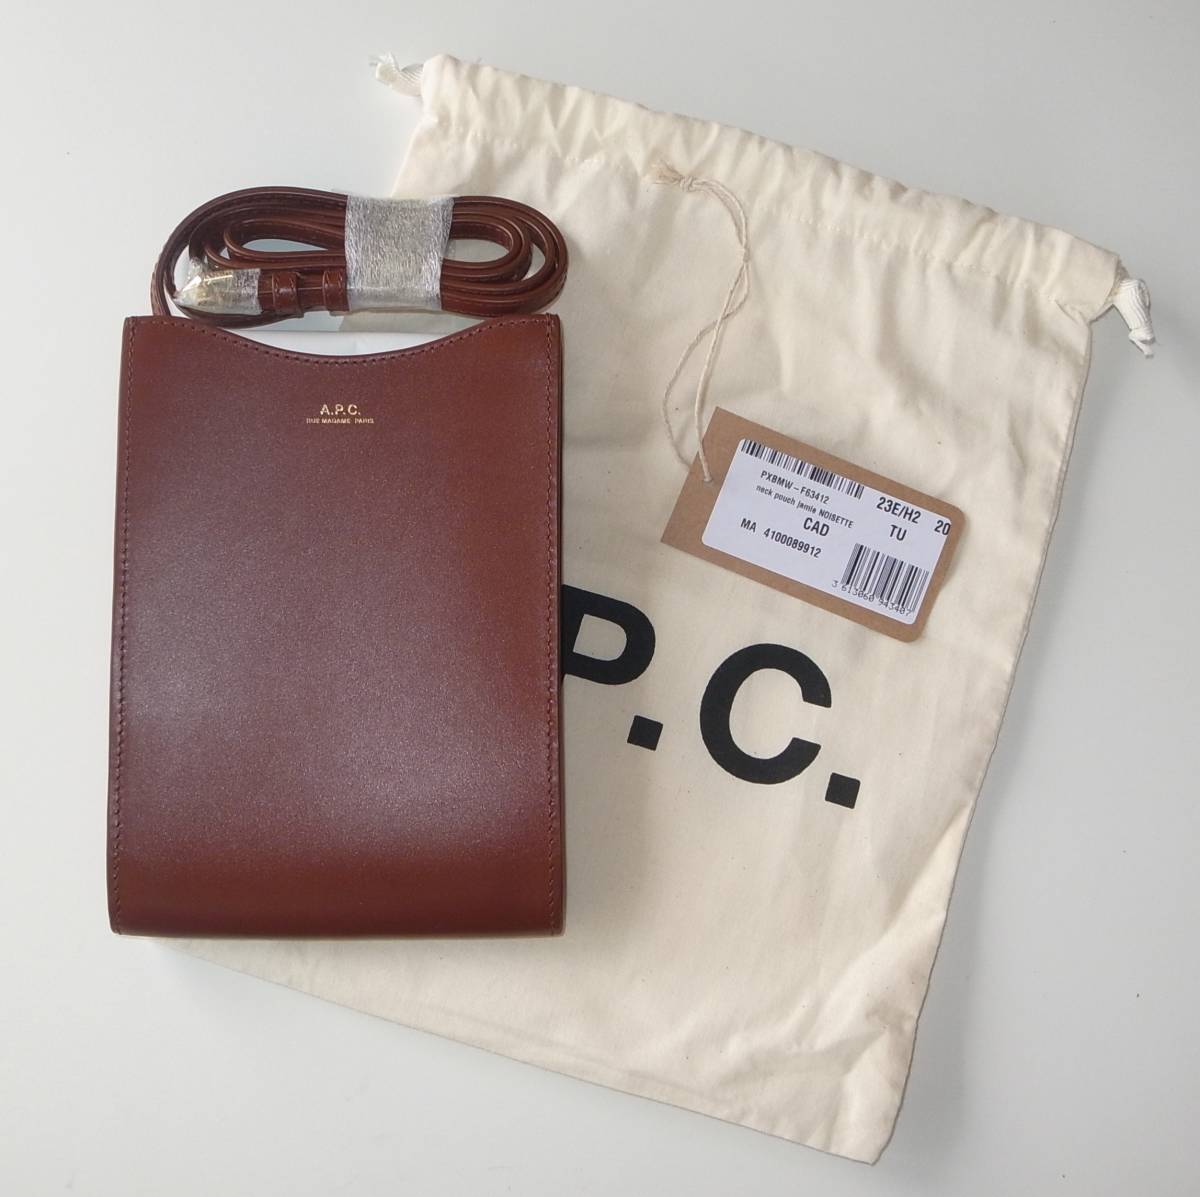 APC jamie neck pouch ミニバッグ ショルダーバッグ brown